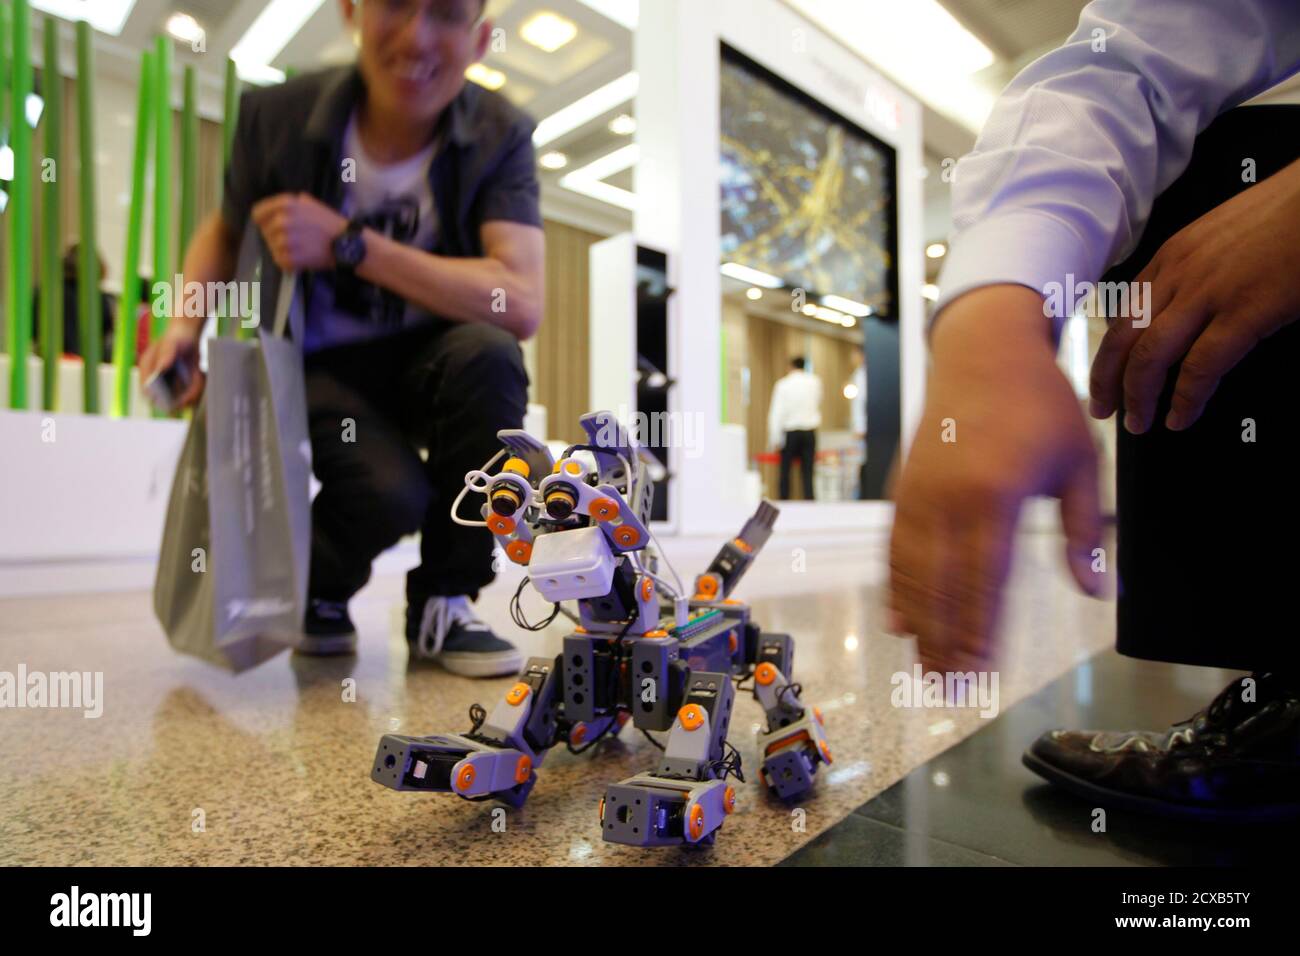 A man looks at a demonstration of a prototype of a dog robot during the 2011 IEEE International Conference on Robotics and Automation (ICRA 2011) in Shanghai May 11, 2011. The theme of the conference is 'Better Robots, Better Life' and it runs from May 9-13. REUTERS/Aly Song  (CHINA - Tags: SOCIETY SCI TECH) Stock Photo